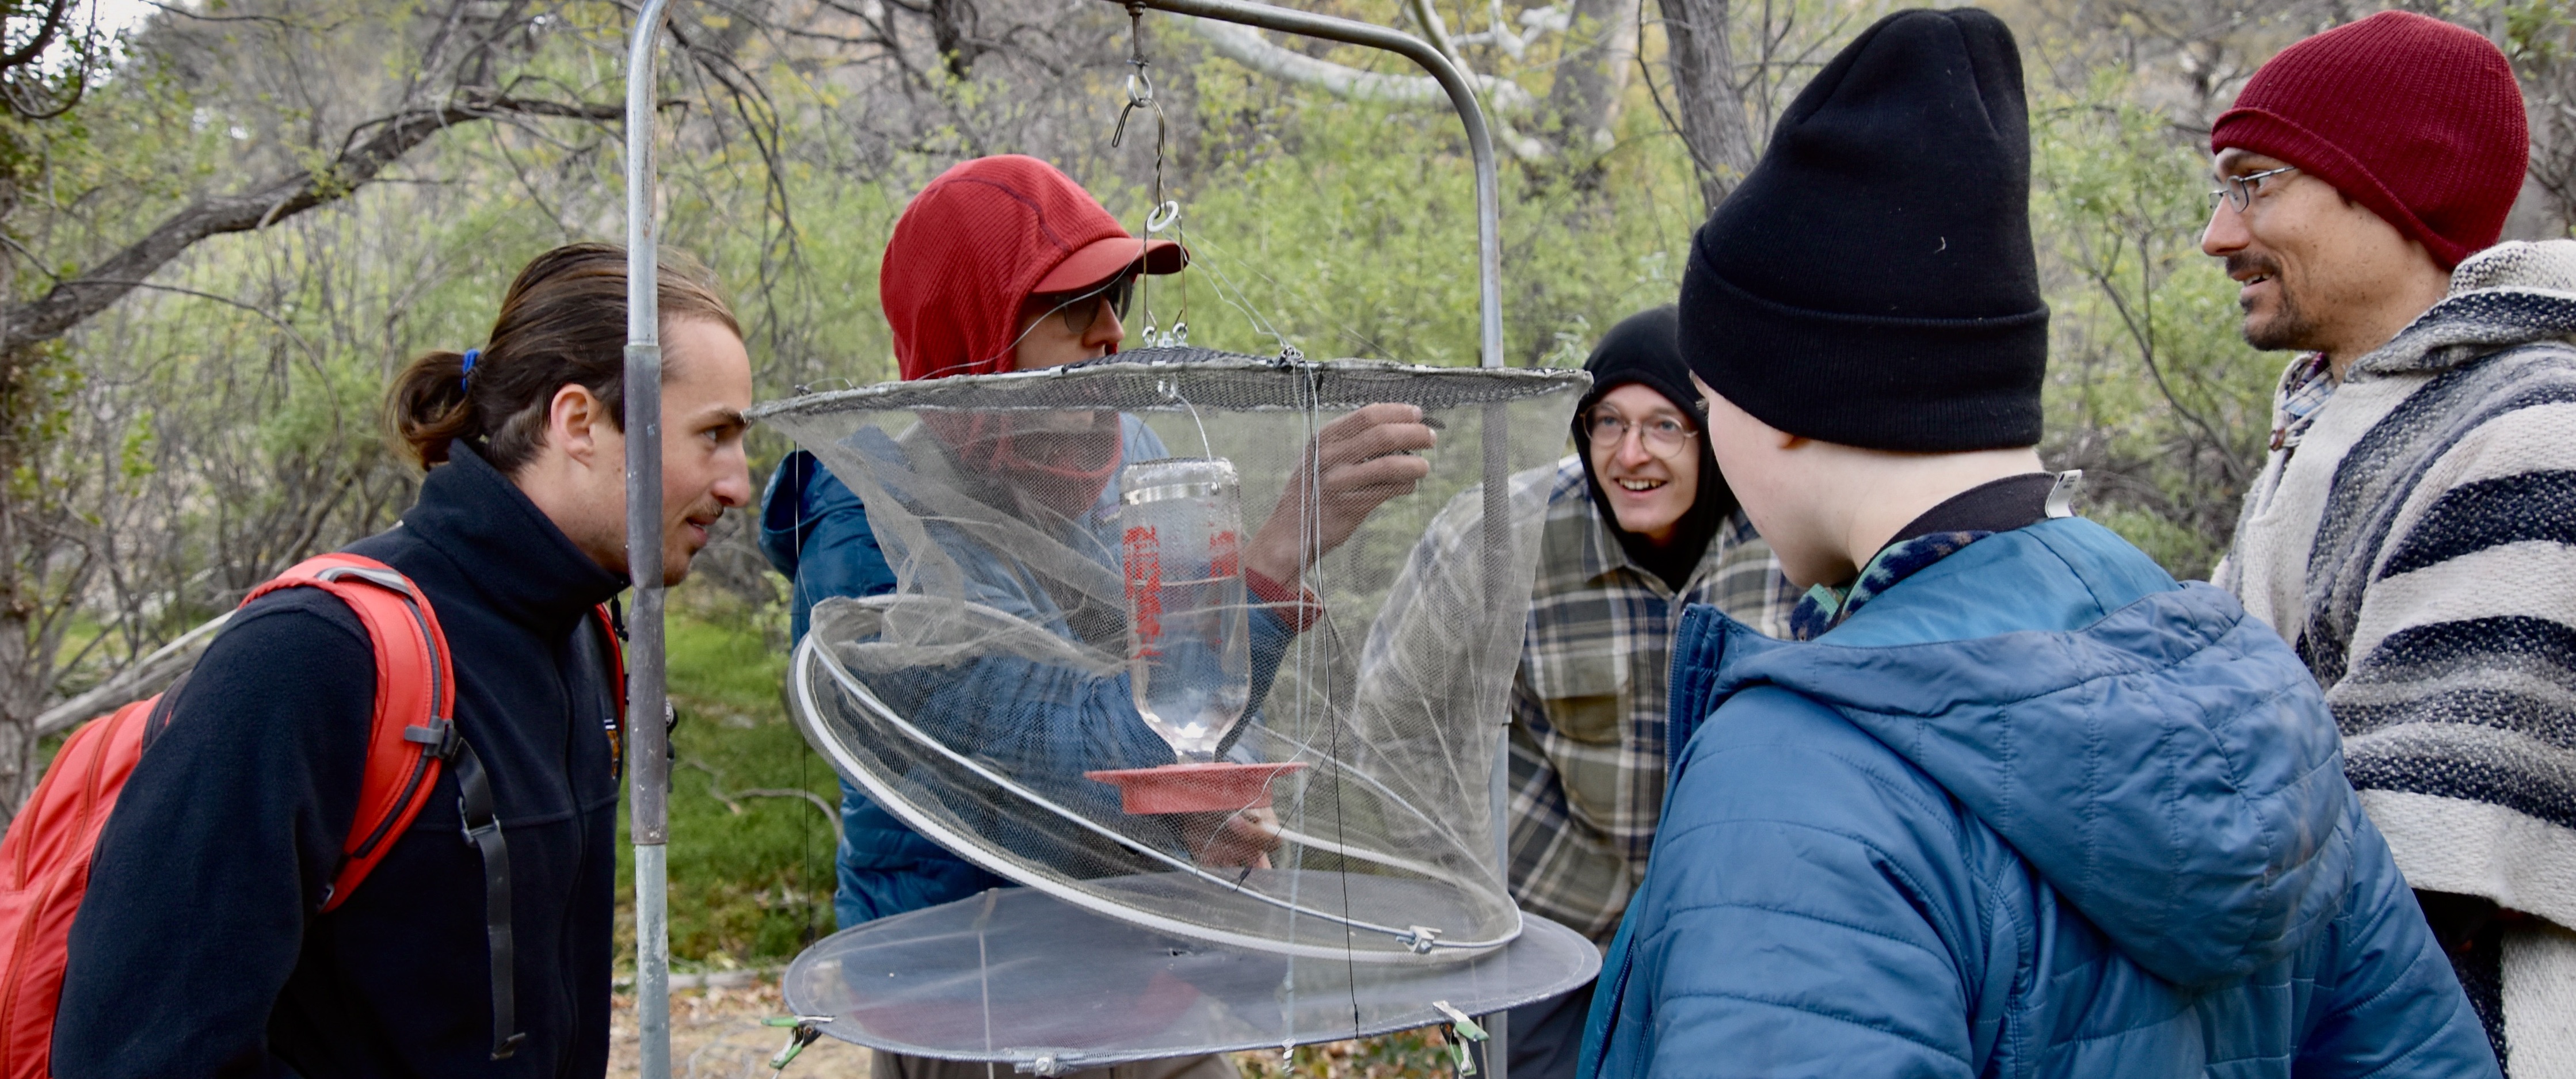 Dr. Brian Linkhart's Ornithology students assist with a hummingbird trapping research project in southeastern Arizona. Photo by Olivia Noonan '20.